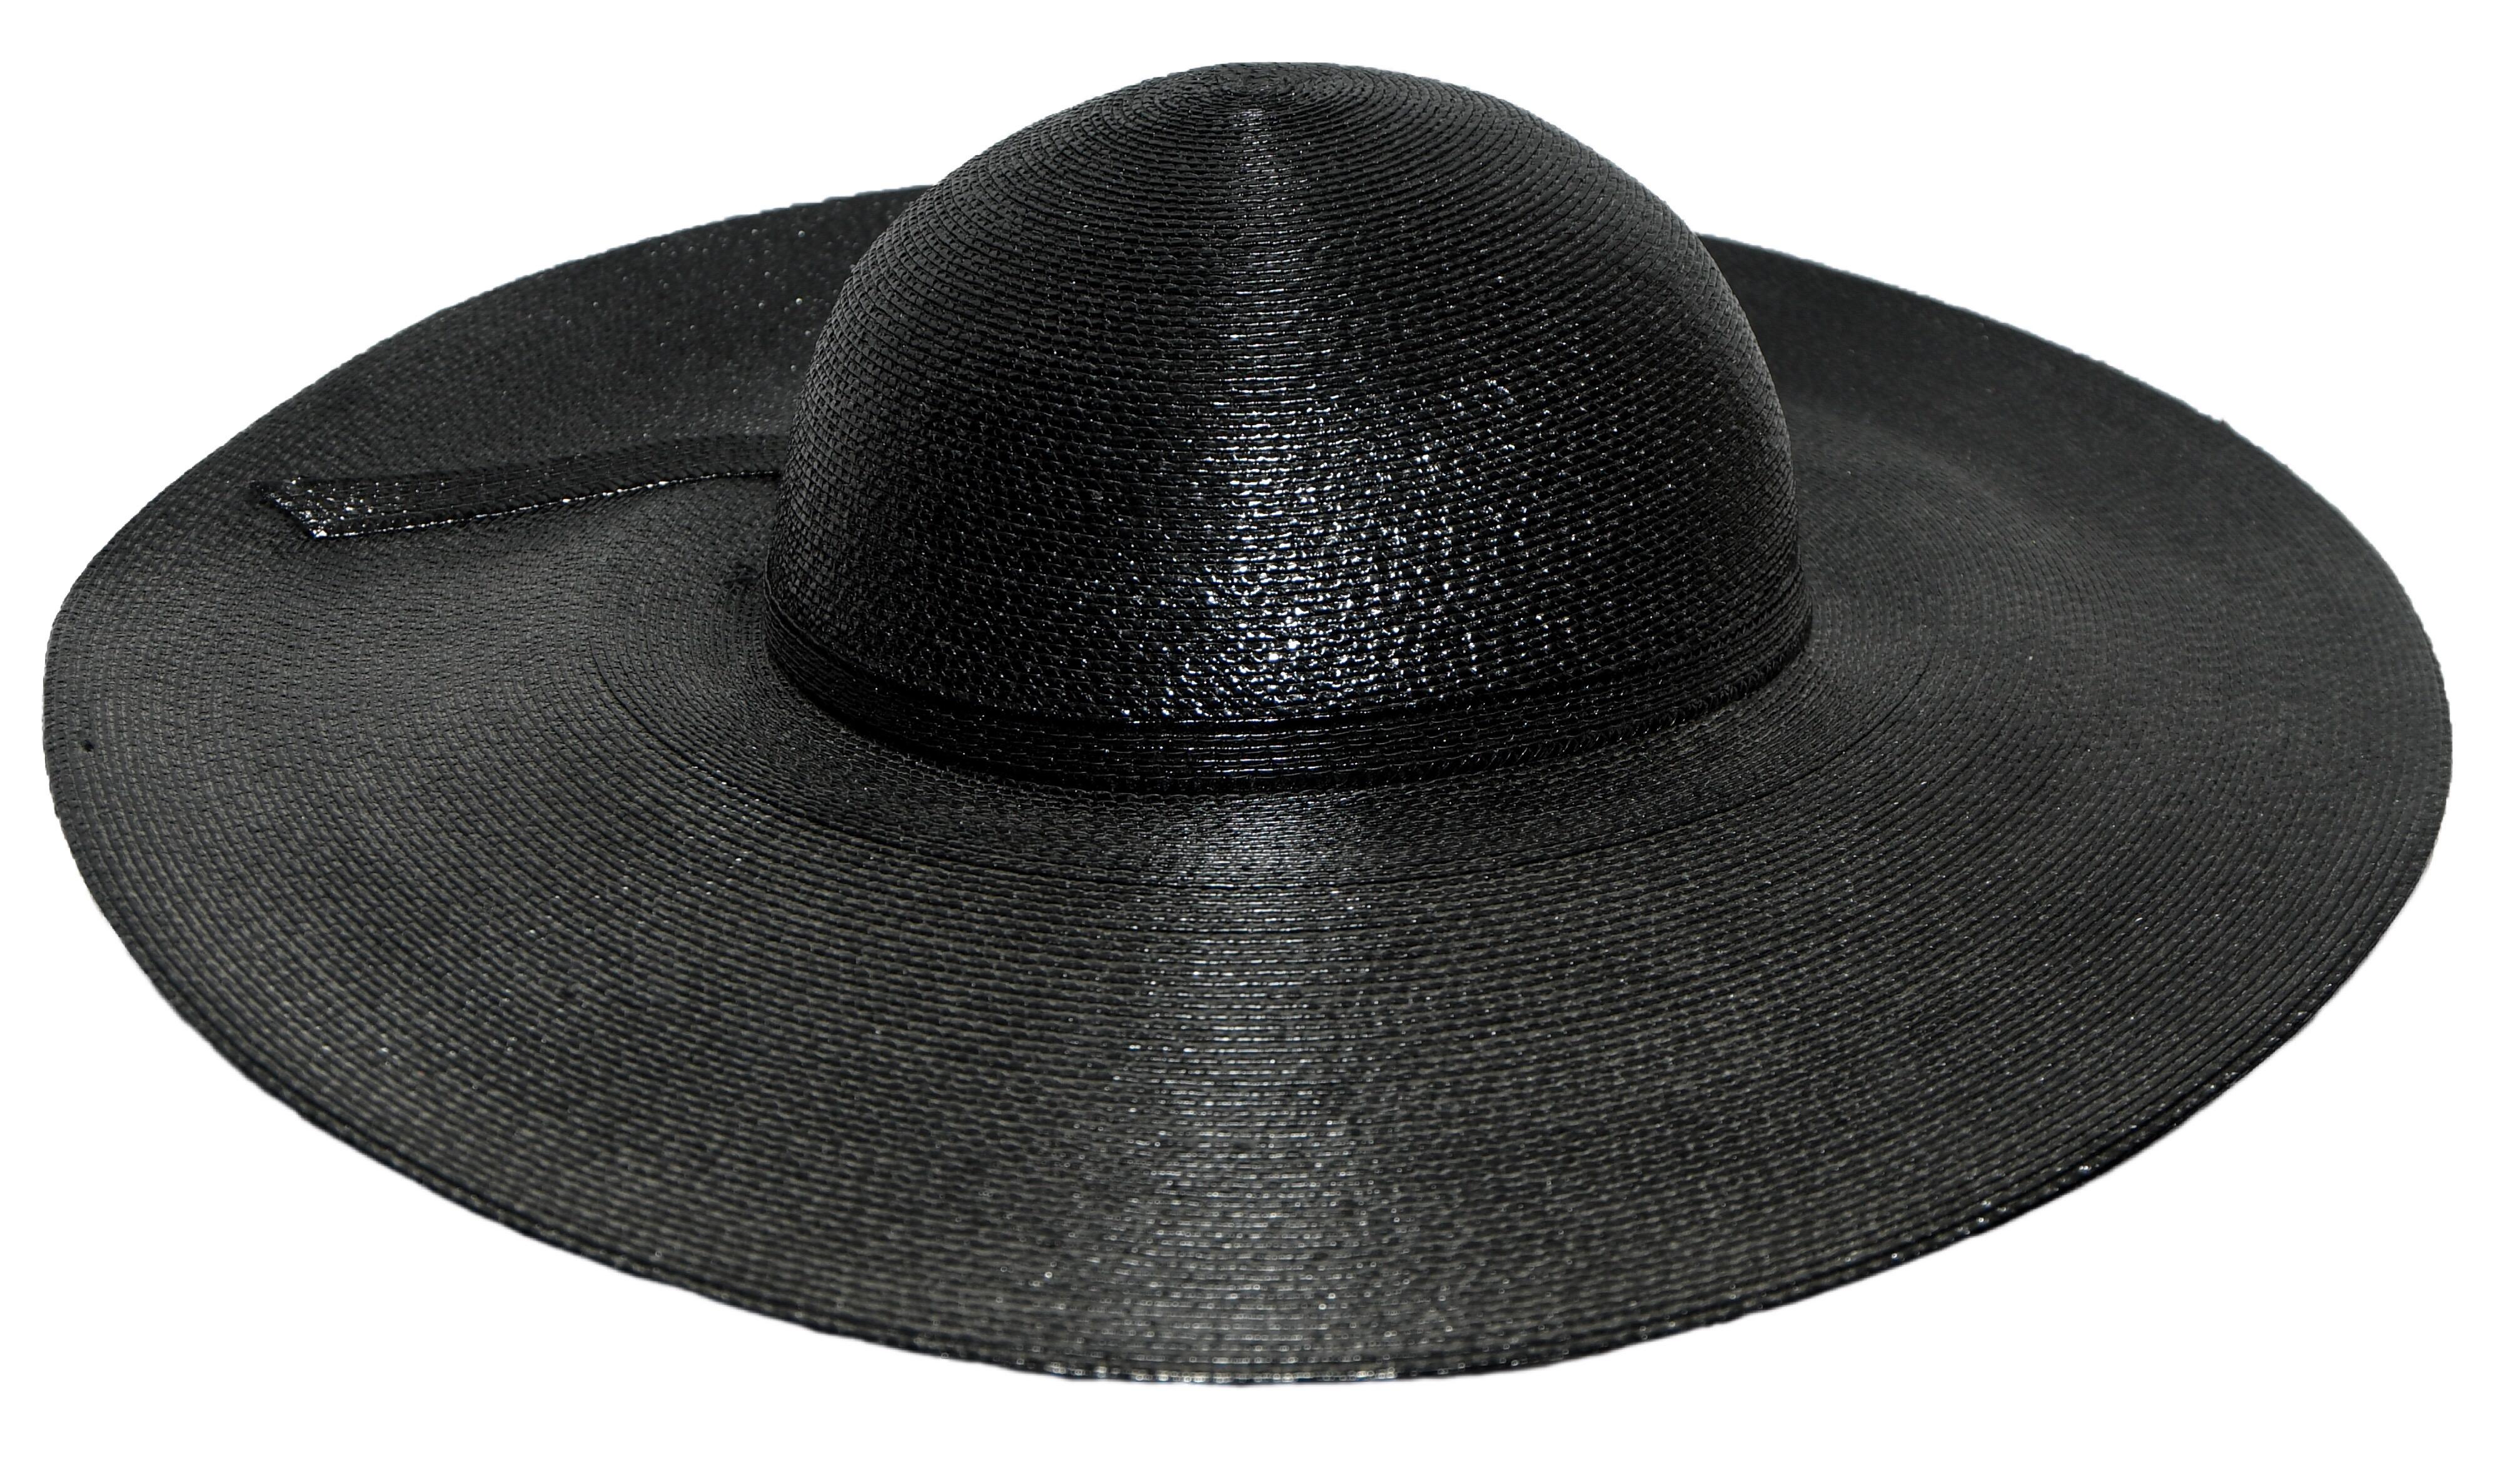 Kurt Jr. by Tom Hann Black Straw Hat In Excellent Condition For Sale In Palm Beach, FL